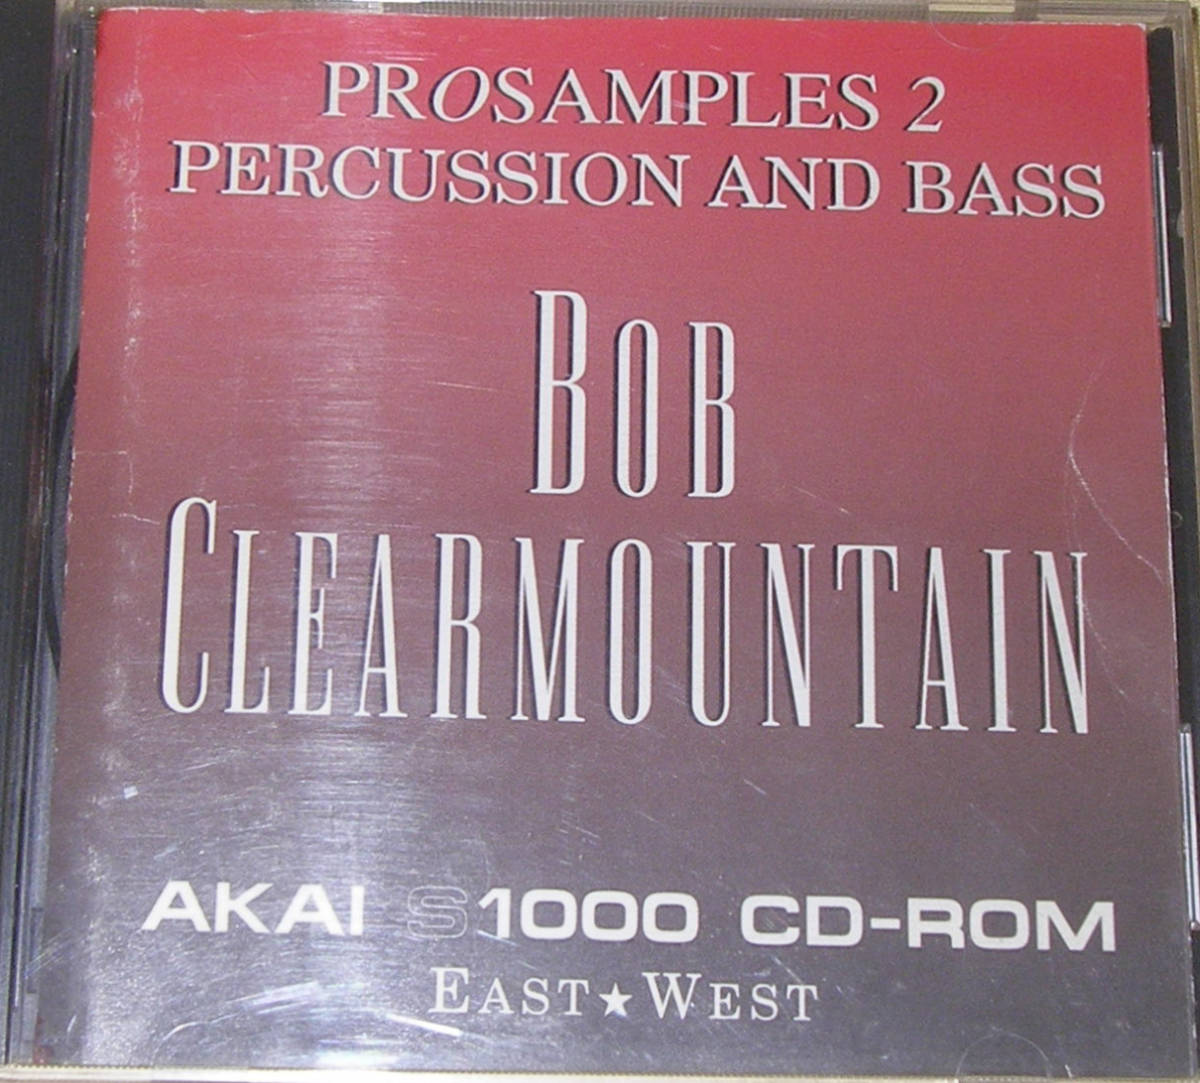 *EAST WEST BOB CLEARMOUNTAIN PERCUSSION AND BASS SOUND LIBRARY (CD-ROM)*